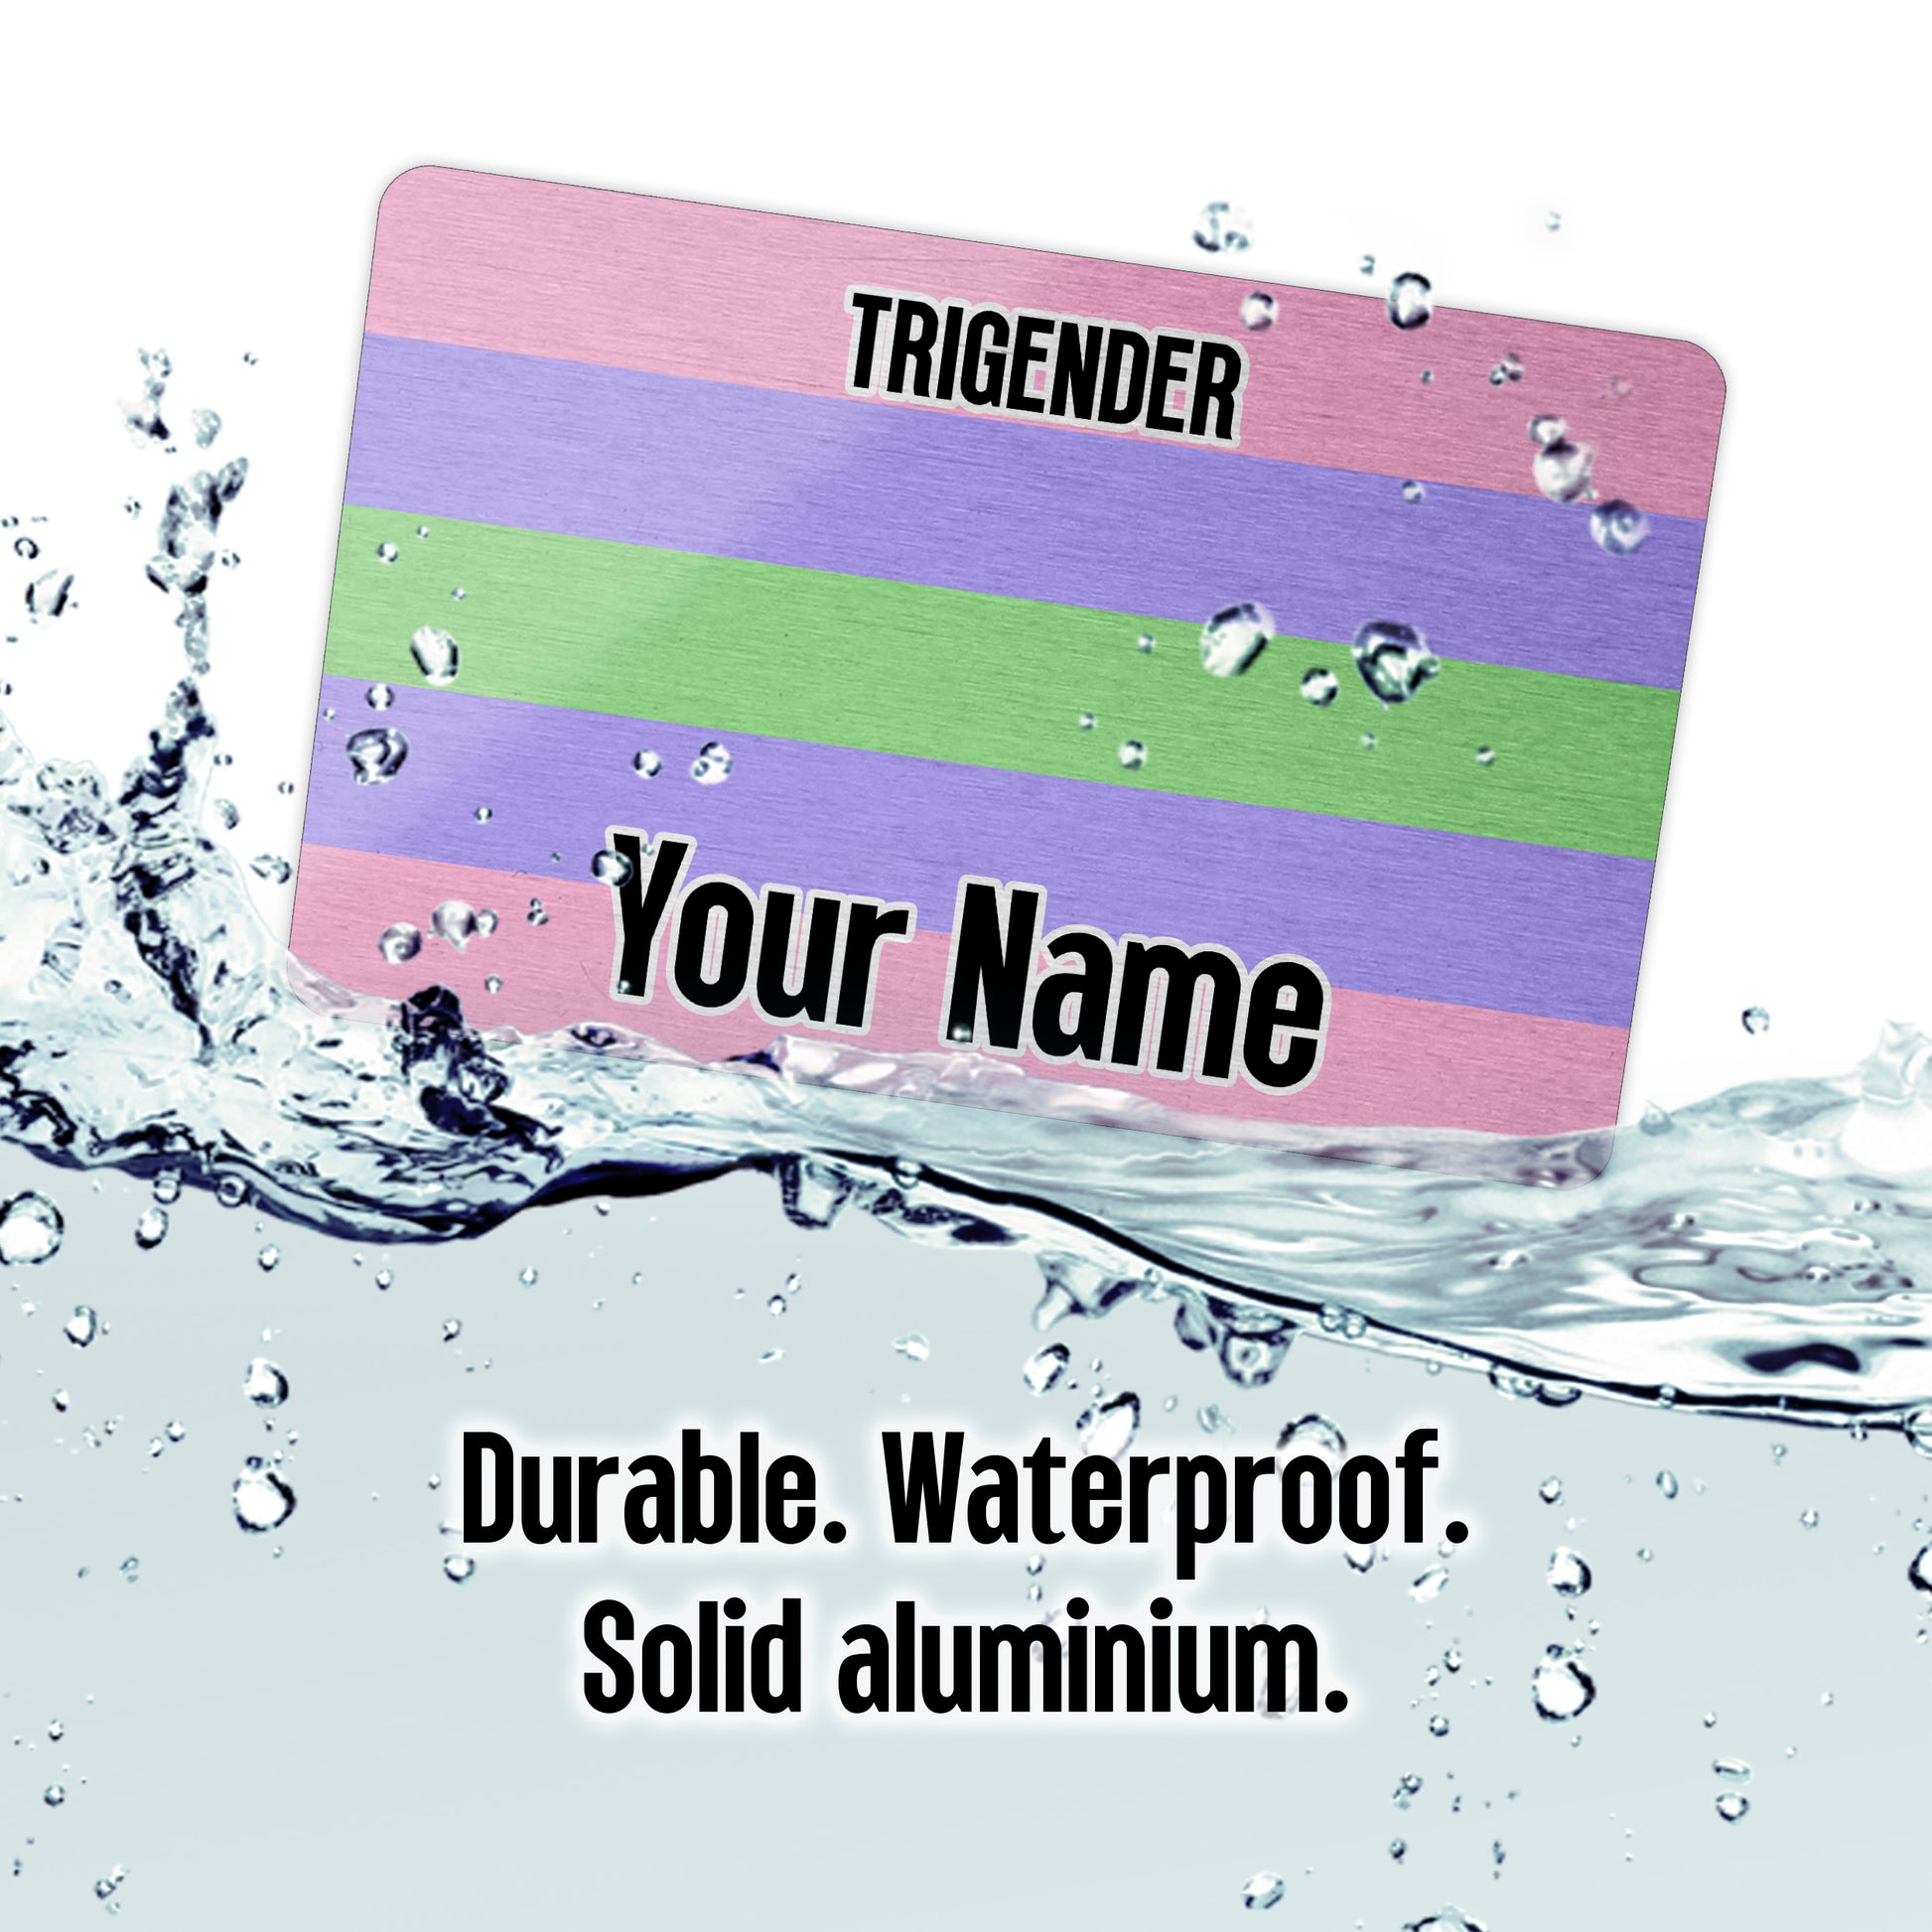 Aluminium wallet card personalised with your name and the trigender pride flag